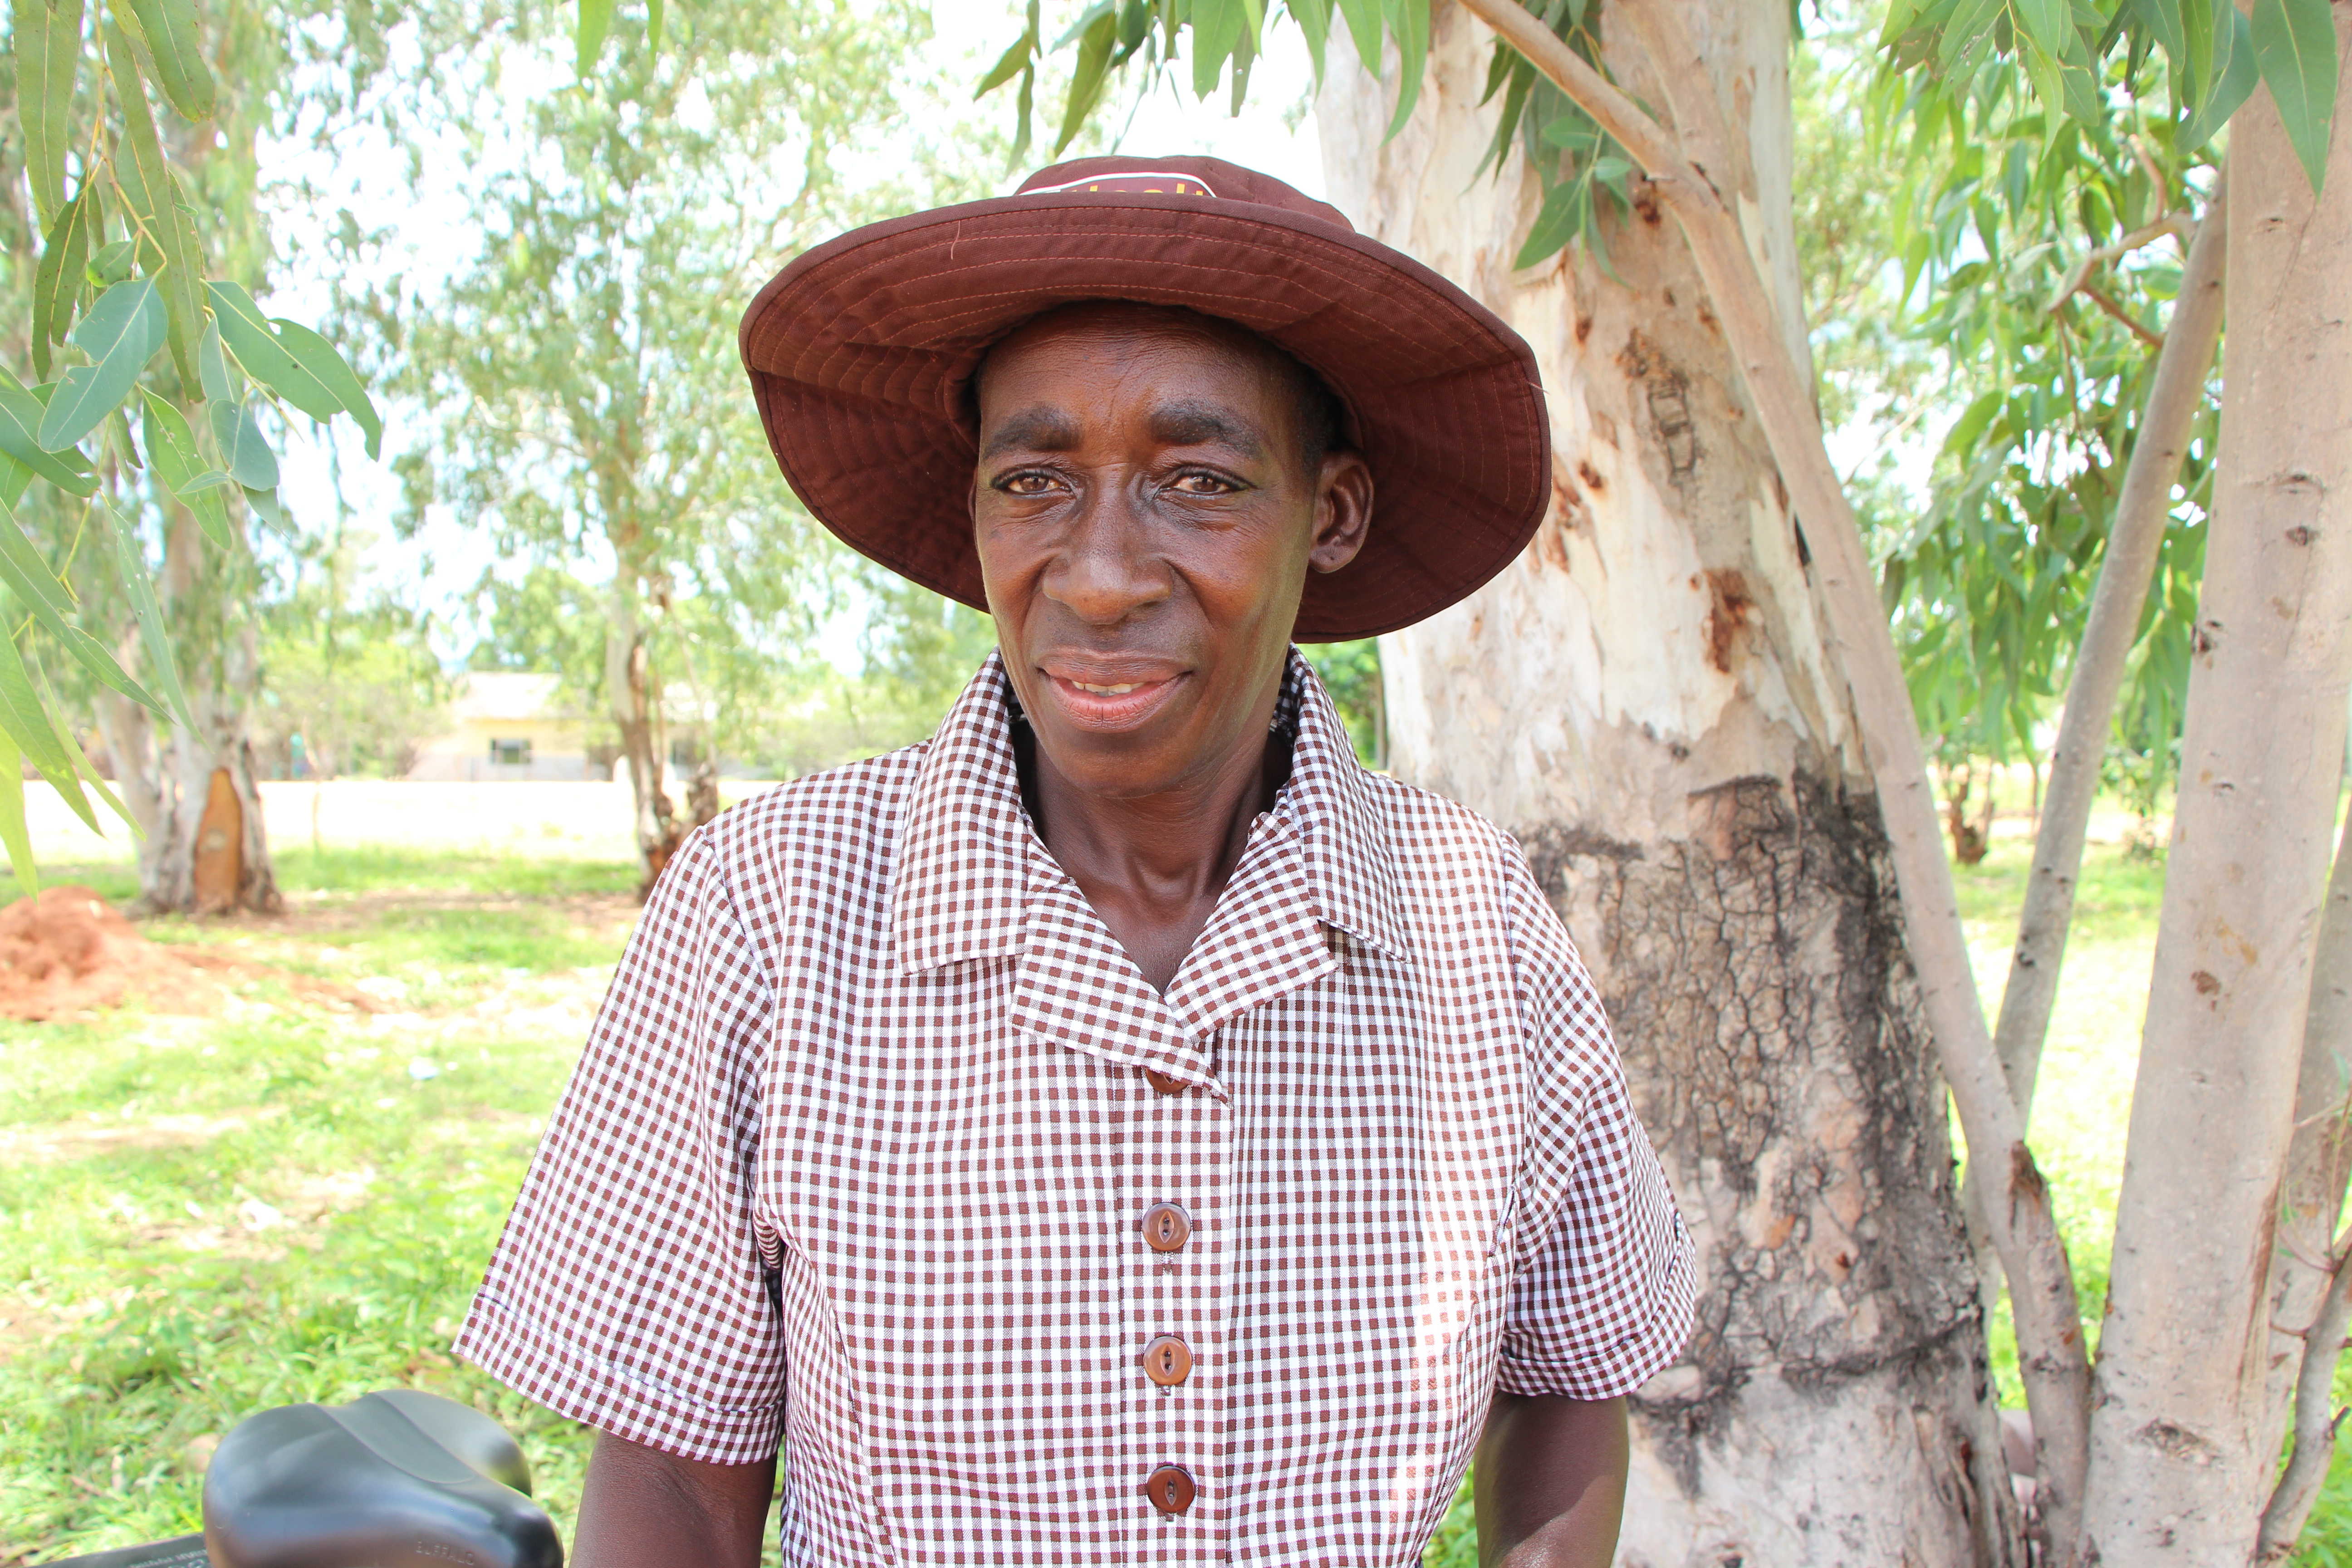 Regina is a community health worker in the Hwange region of Zimbabwe. Photo courtesy World Bicycle Relief.